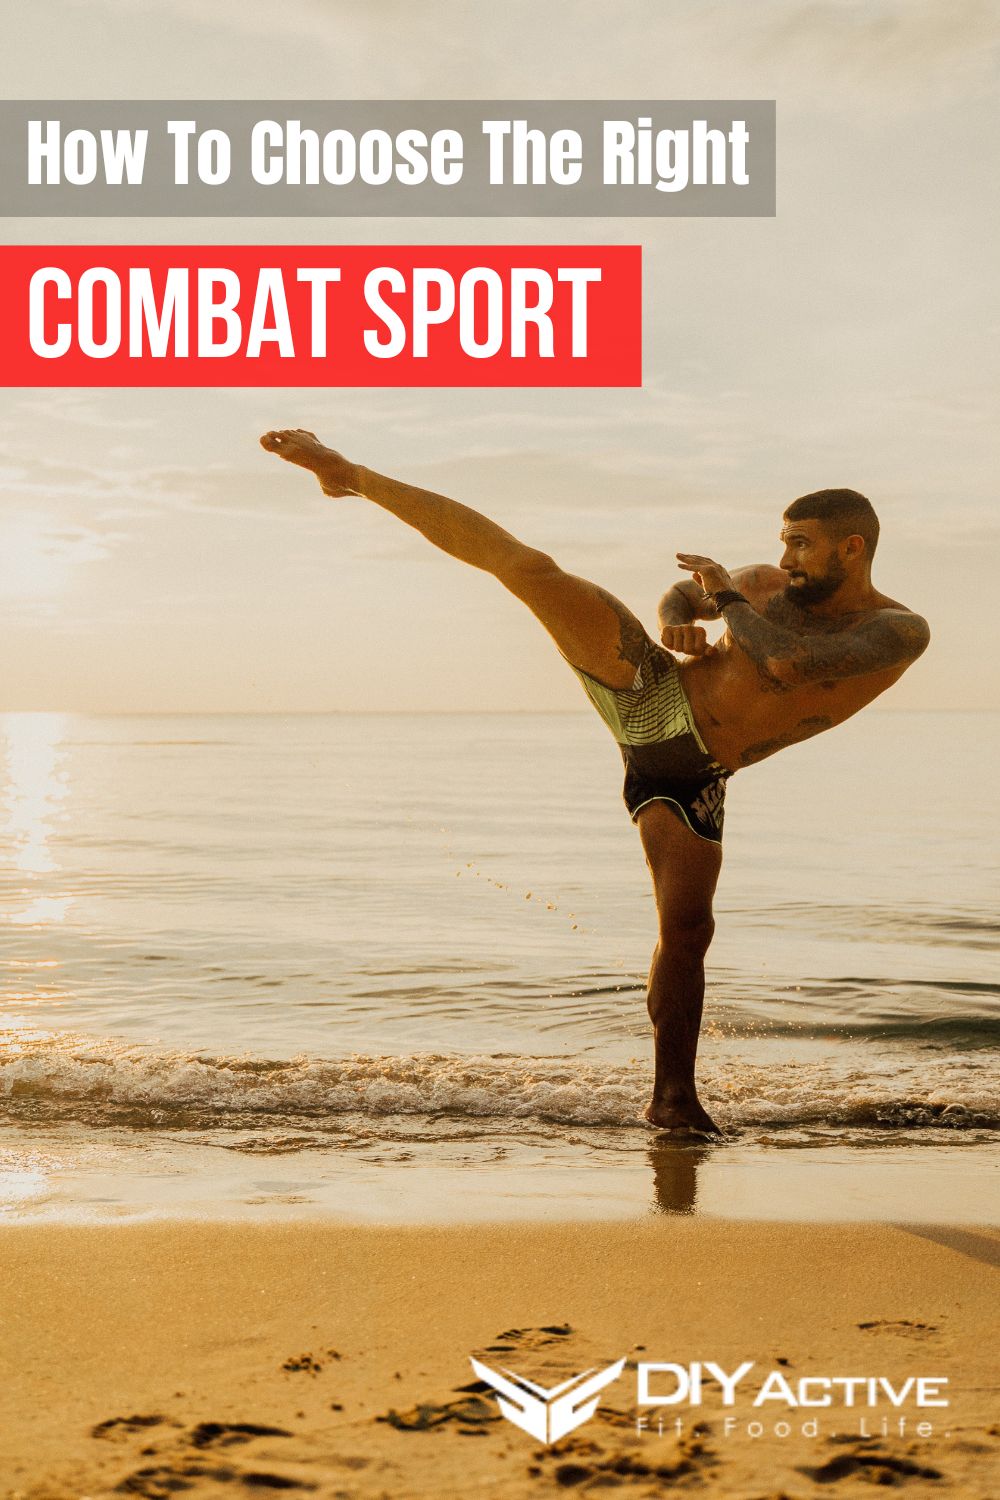 How To Choose The Right Combat Sport?